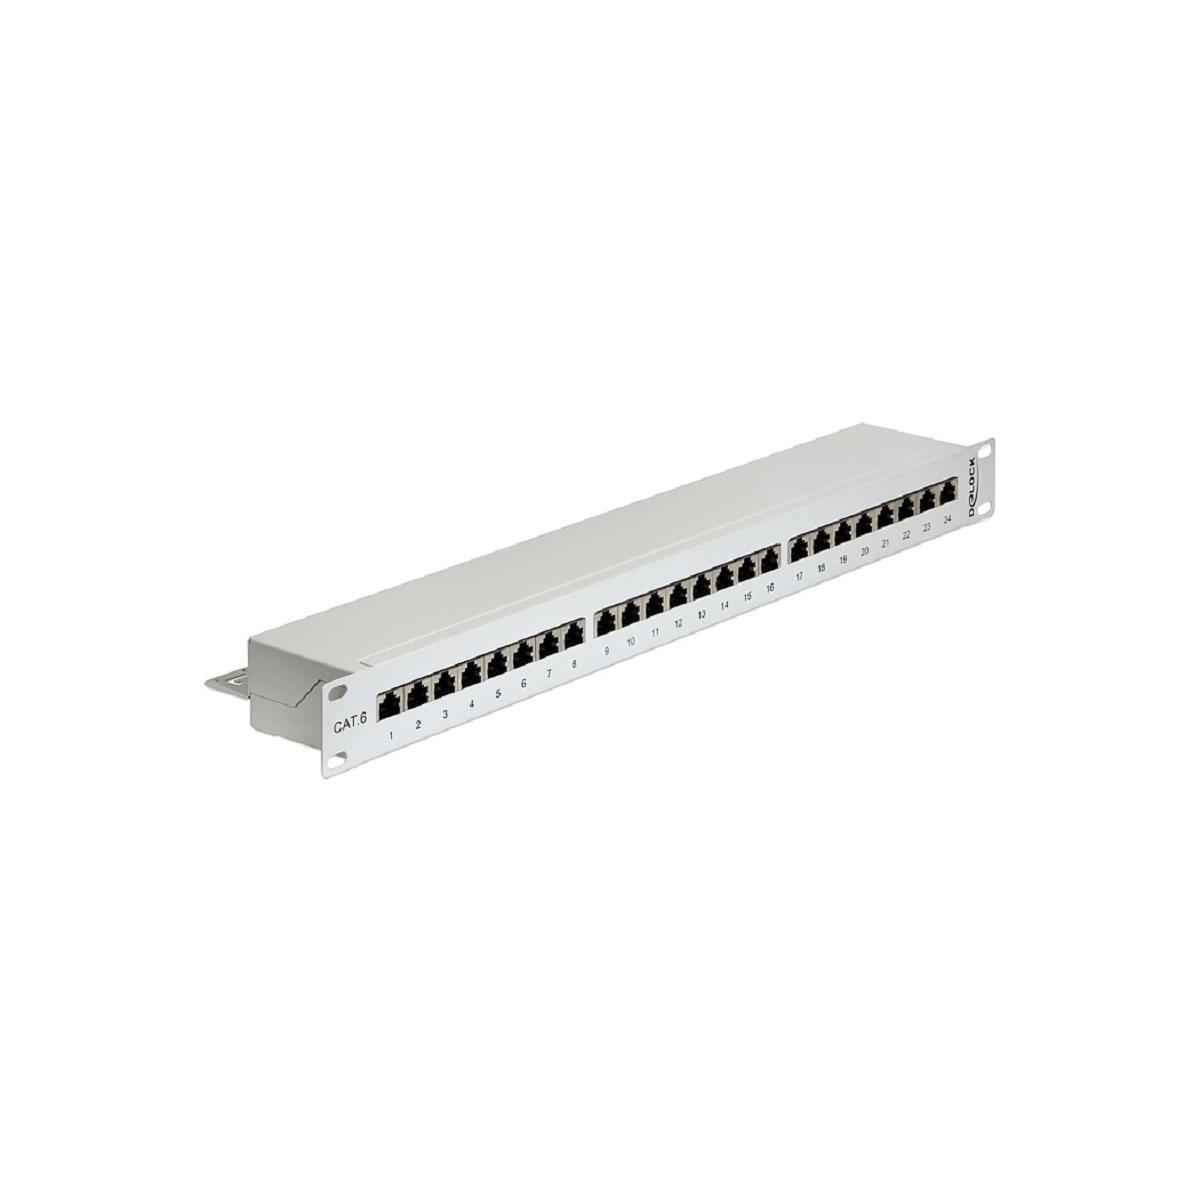 DELOCK Patchpanel 43300